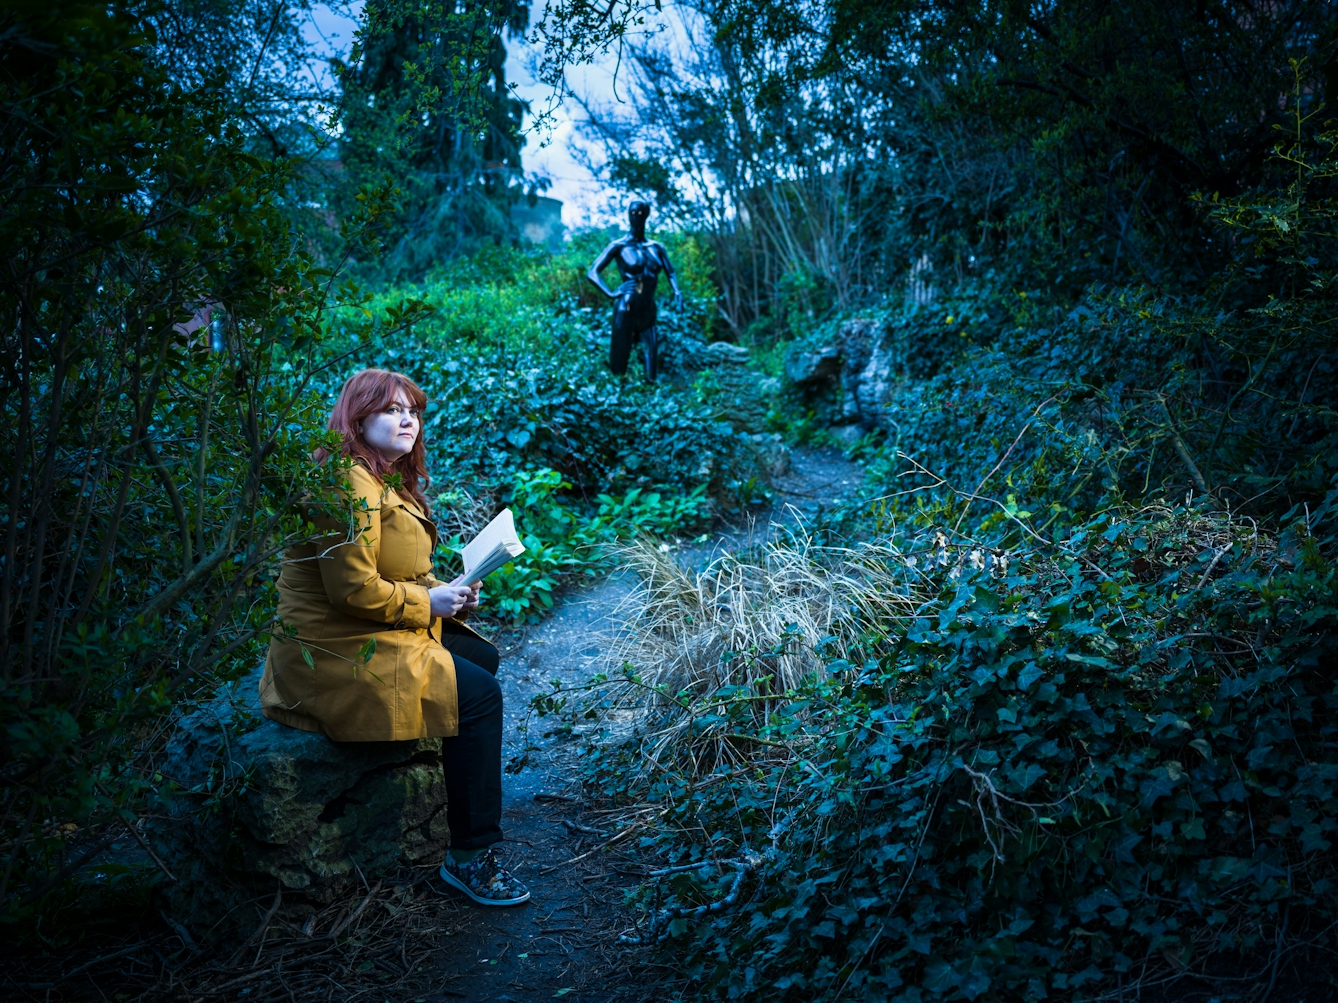 Photograph of a young woman sitting on a rock in a wooded area, looking up from reading her book. Behind her in the background a human form appears from the undergrowth.